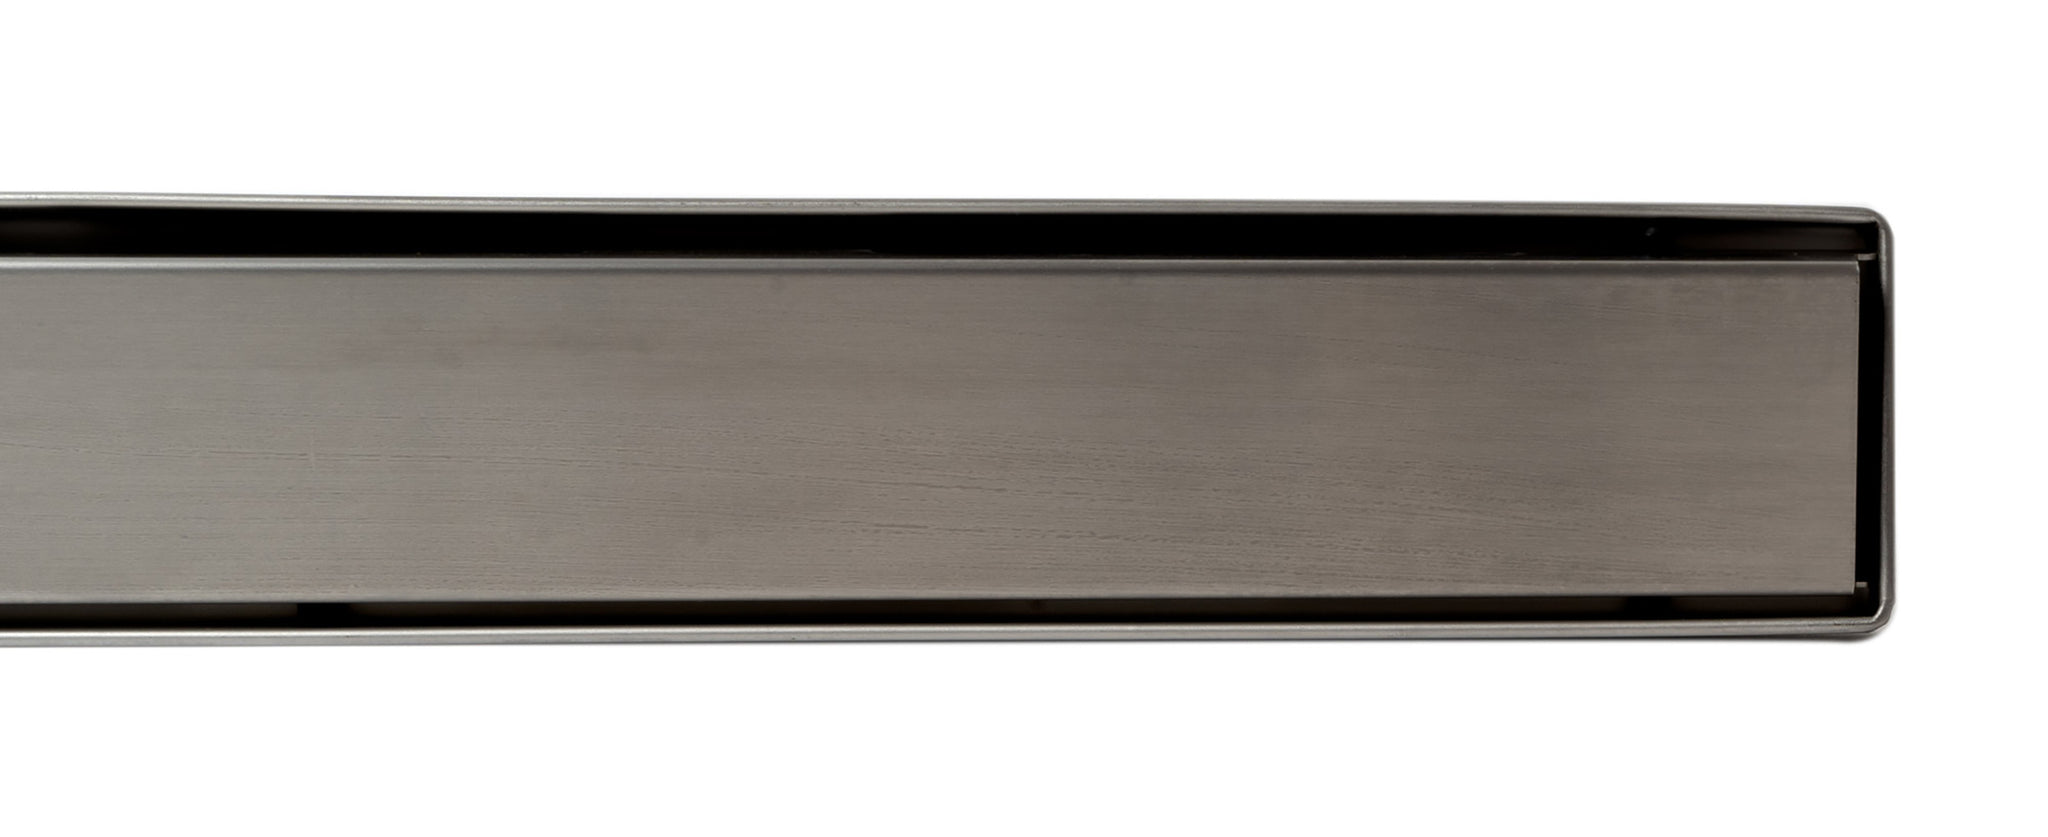 Alfi Brand ABLD59B-BSS 59 Brushed Stainless Steel Linear Shower Drain with Solid Cover